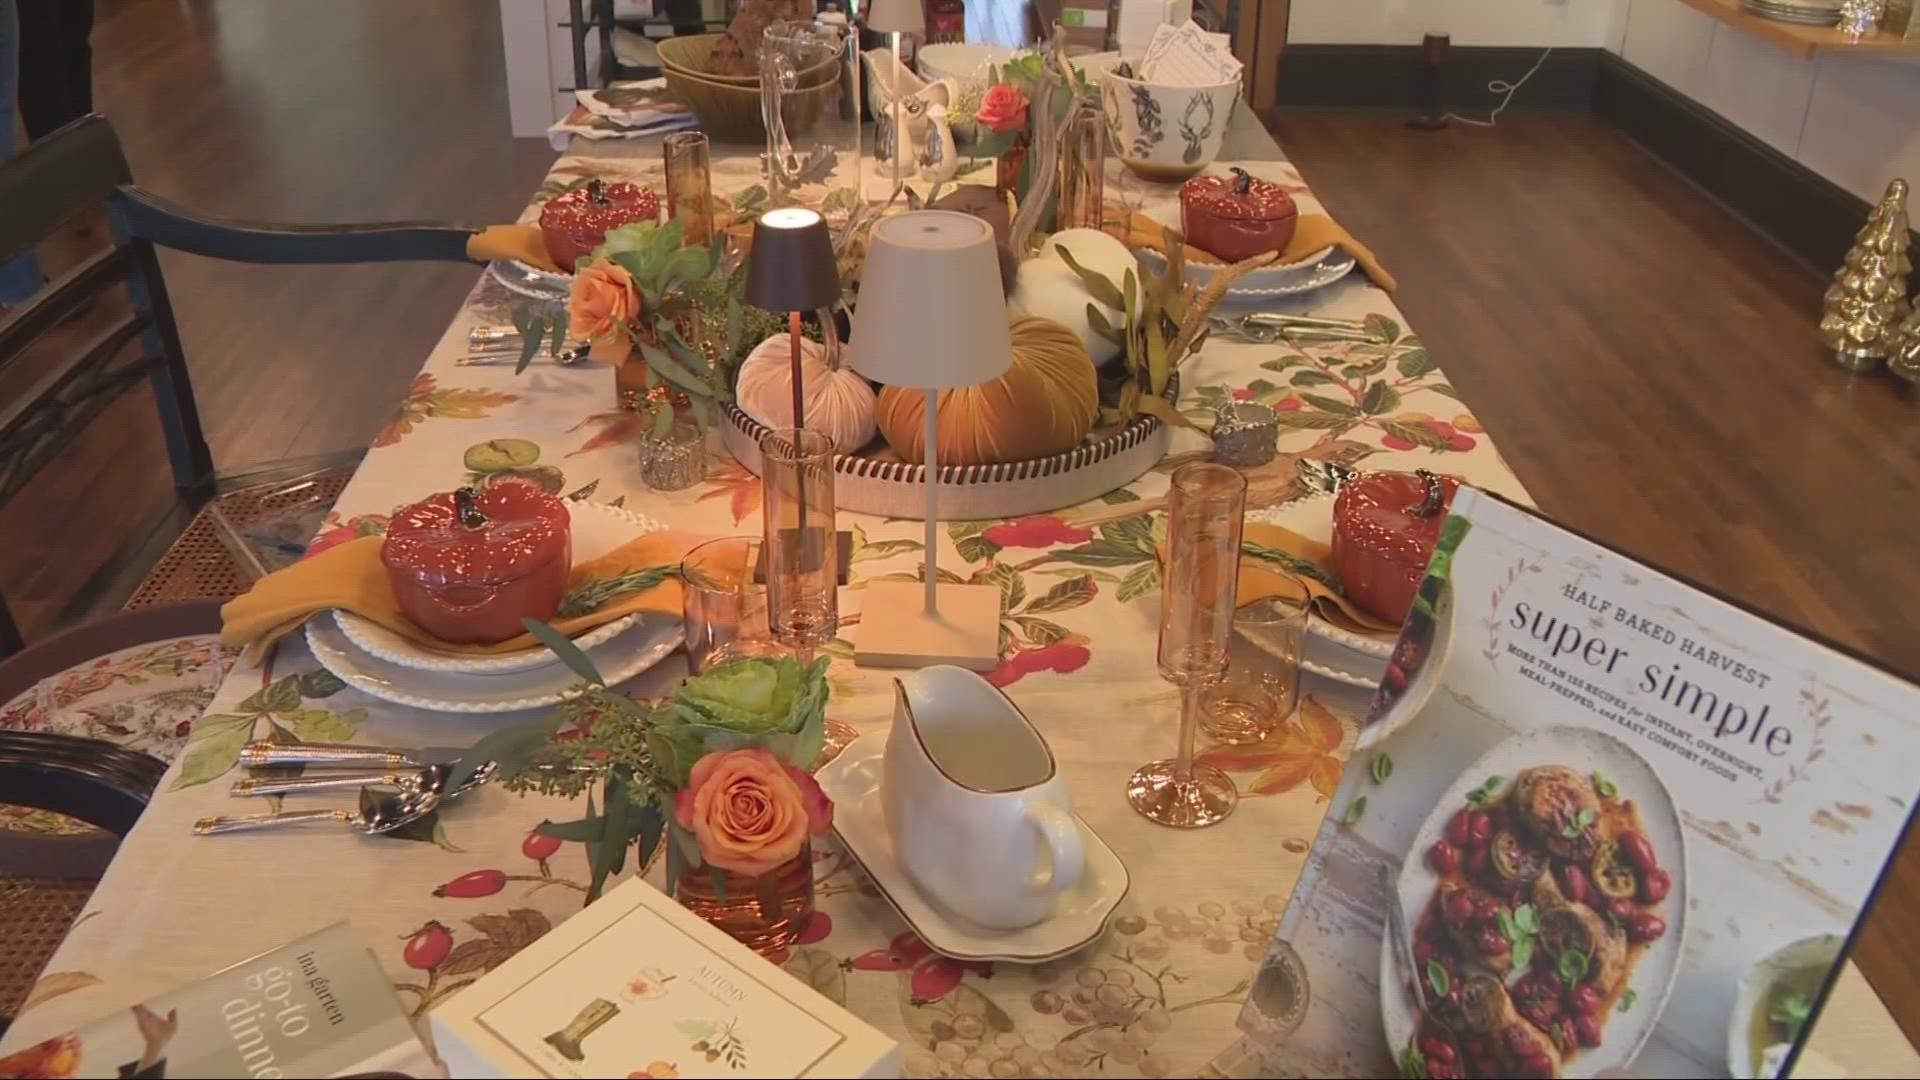 Whether your style is festive, formal or fun, 3News Style Contributor Hallie Abrams shares some tablescape inspiration with help from Hedges in Chagrin Falls.